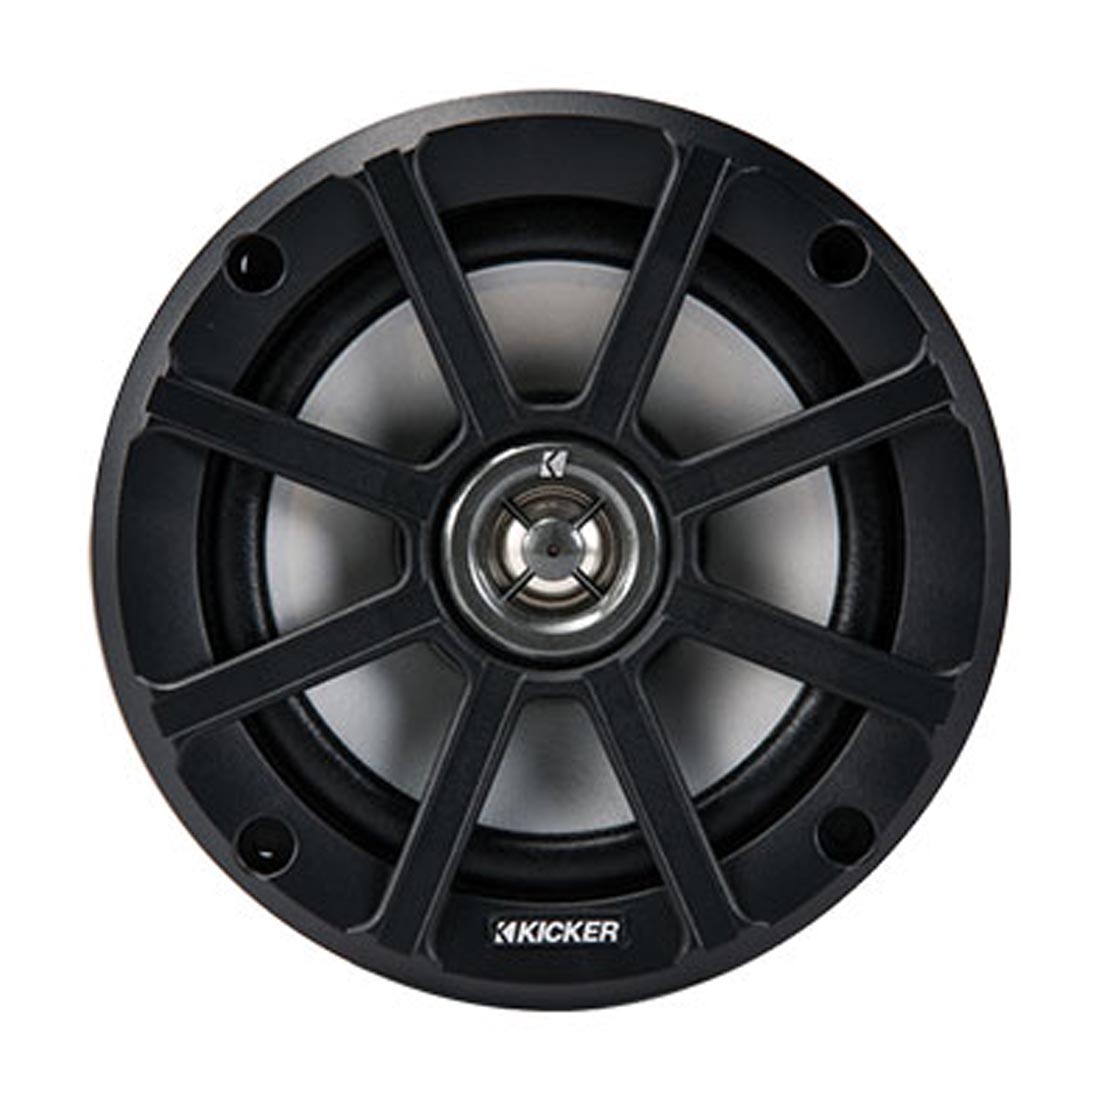 Kicker 42PSC654 6.5" 2-Way 4-Ohm Speakers for use in Motorcycles, Boats, and Off-Road Vehicles